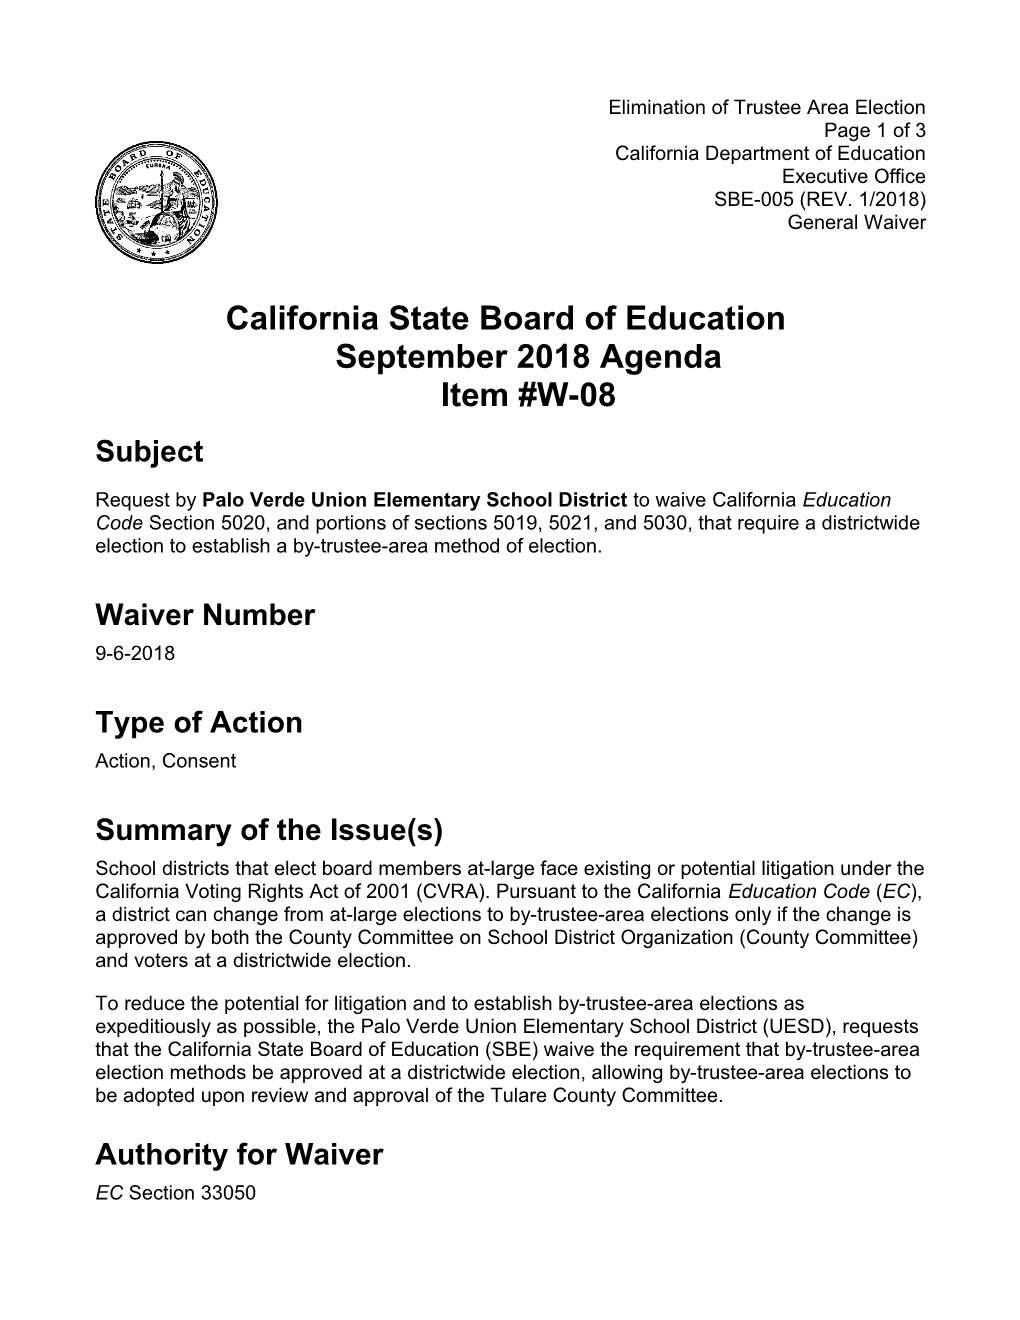 September 2018 Waiver Item W-08 - Meeting Agendas (CA State Board of Education)